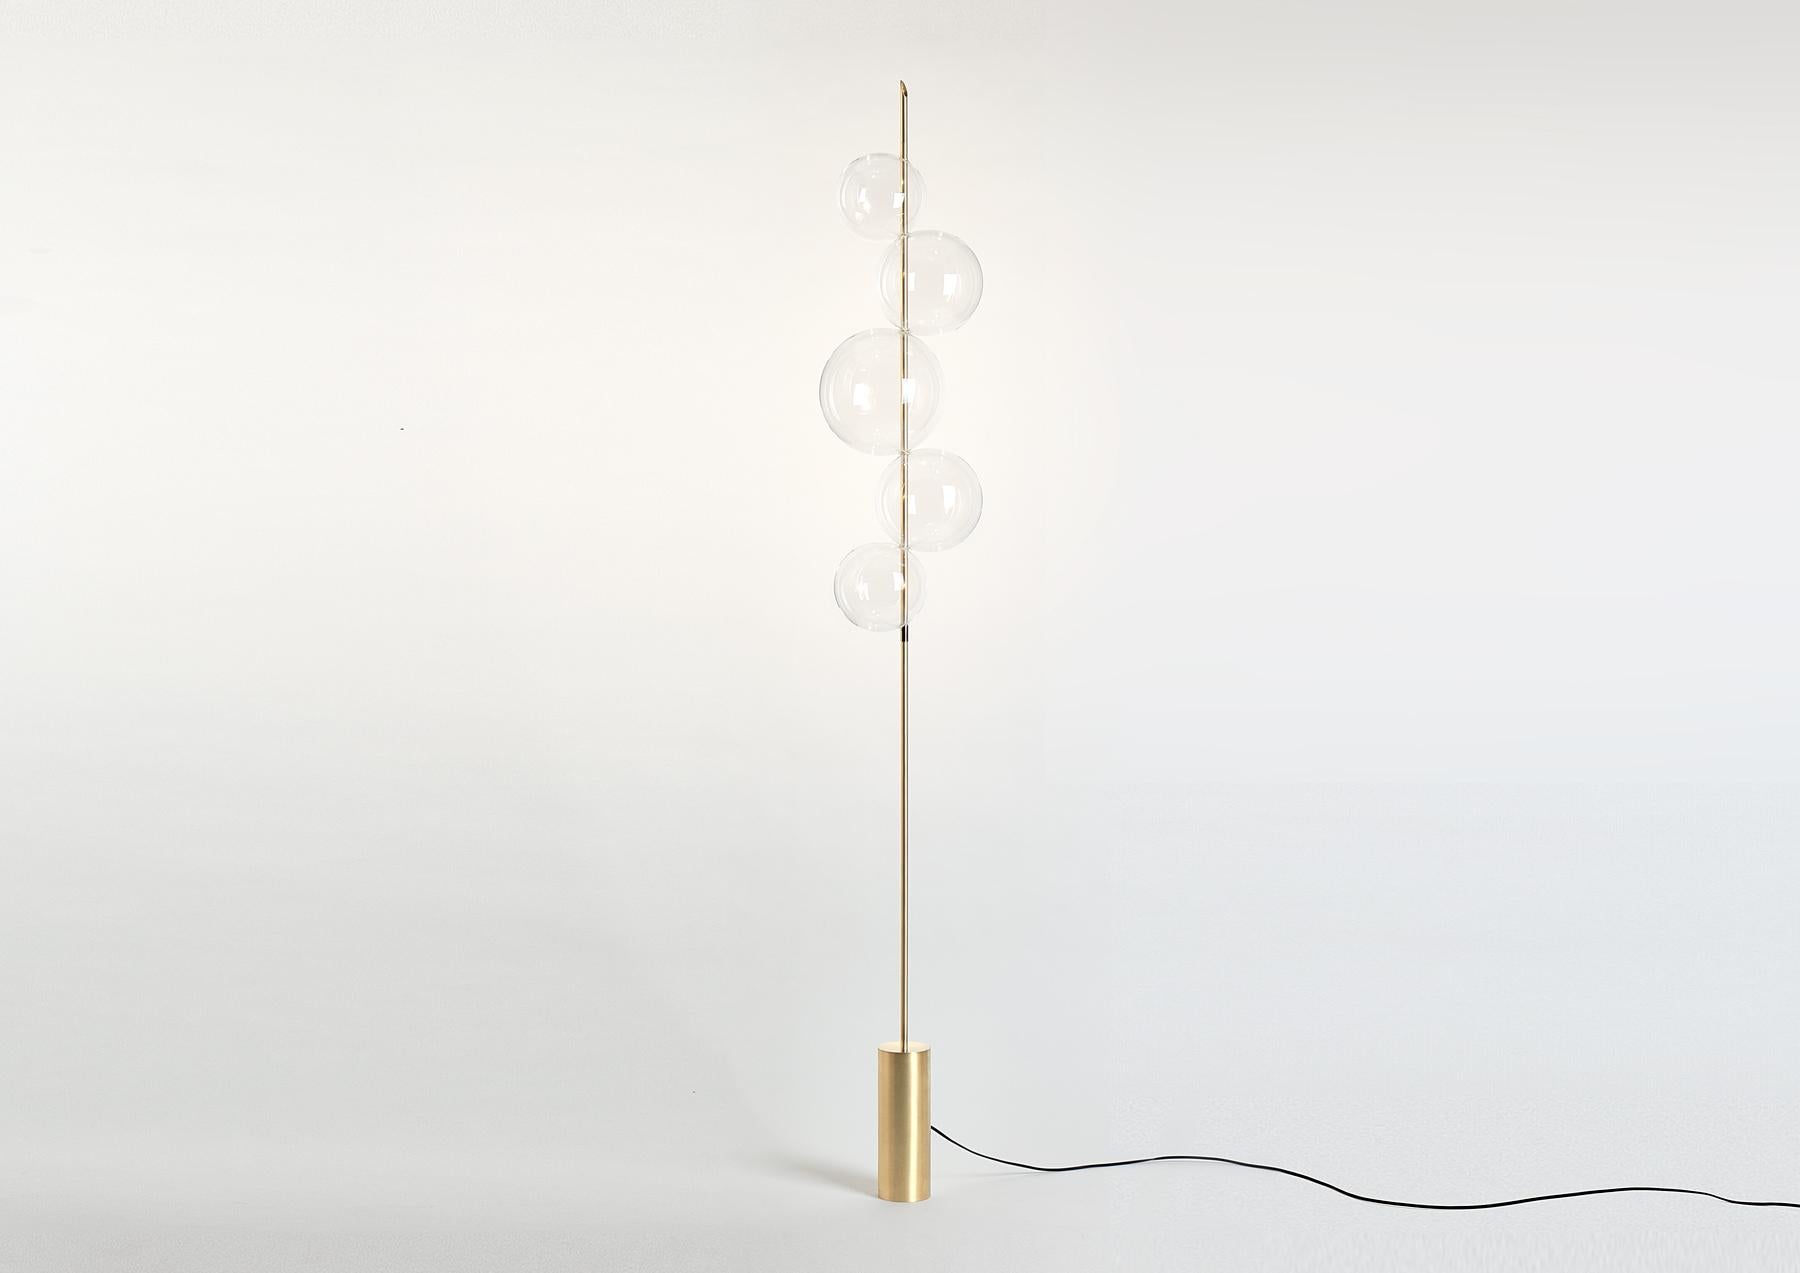 Inspired by pieces of Hail, Grandine Five lights Floor / Standing Lamp is composed of five touching glass orbs, which are positioned to give the impression of balls of ice that have melted together to form one solid, transparent piece. 
This lamp